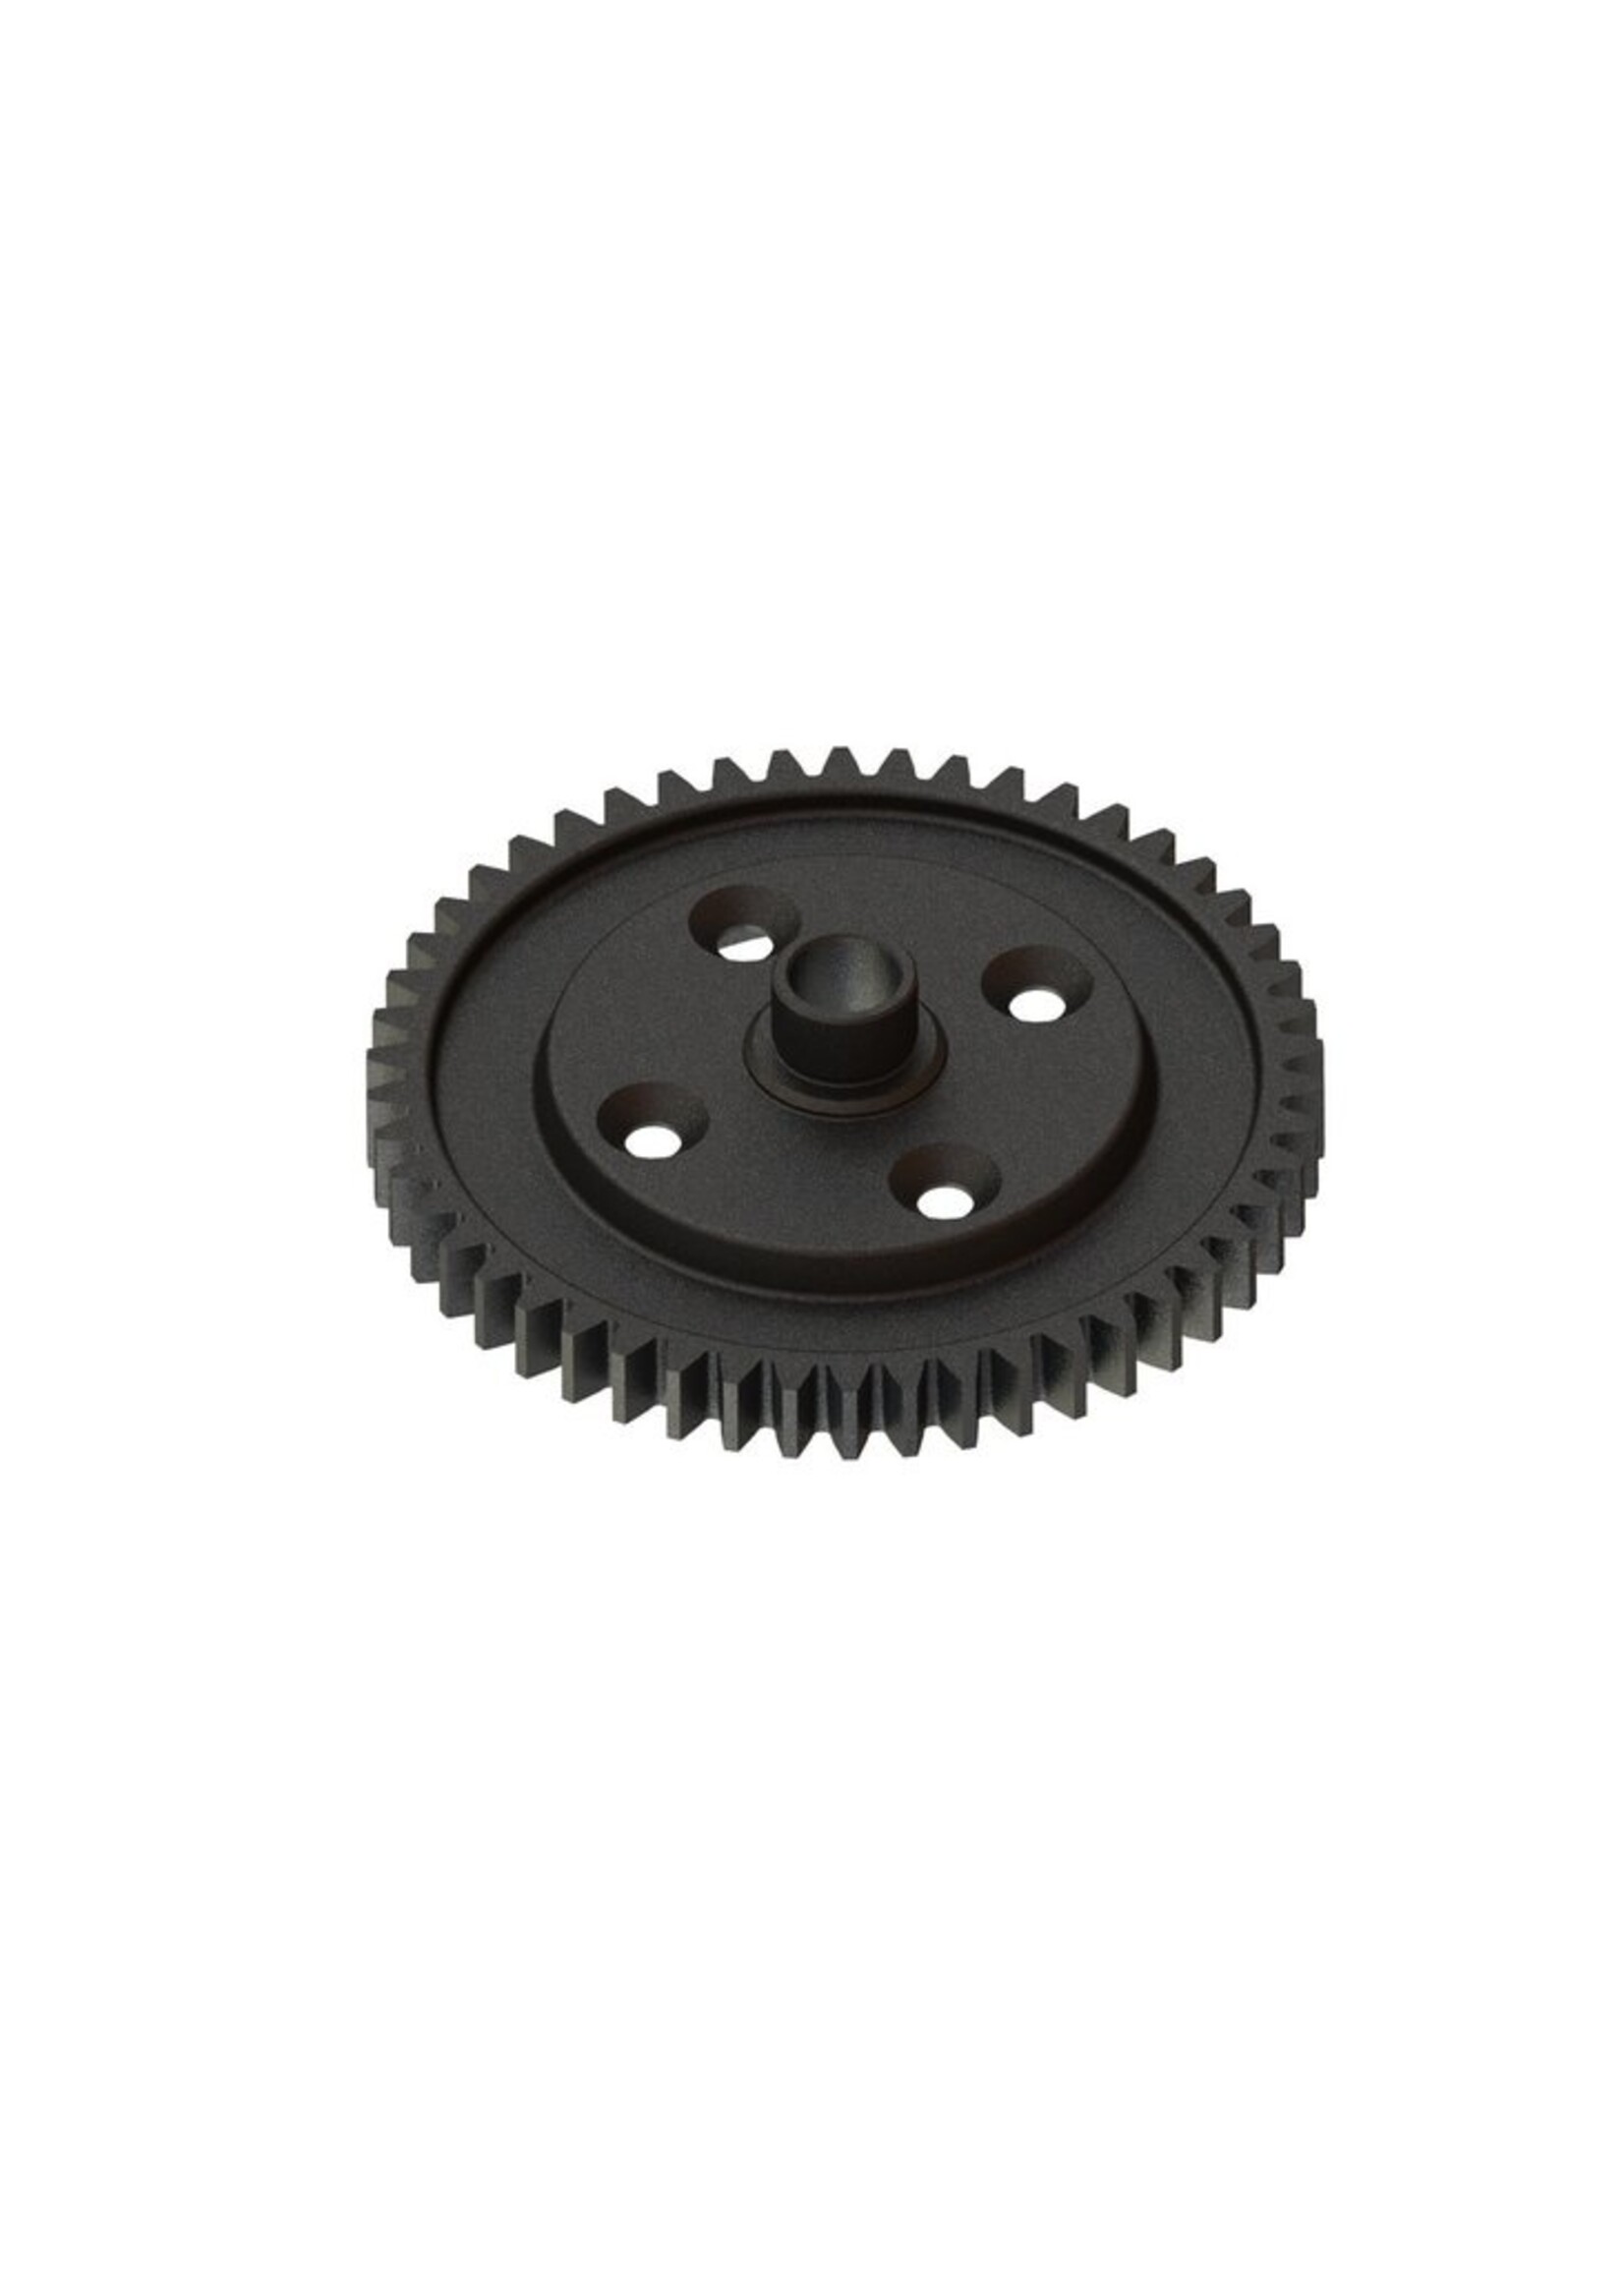 ARA310978	Spur Gear 50T Plate Diff for 29mm Diff Case